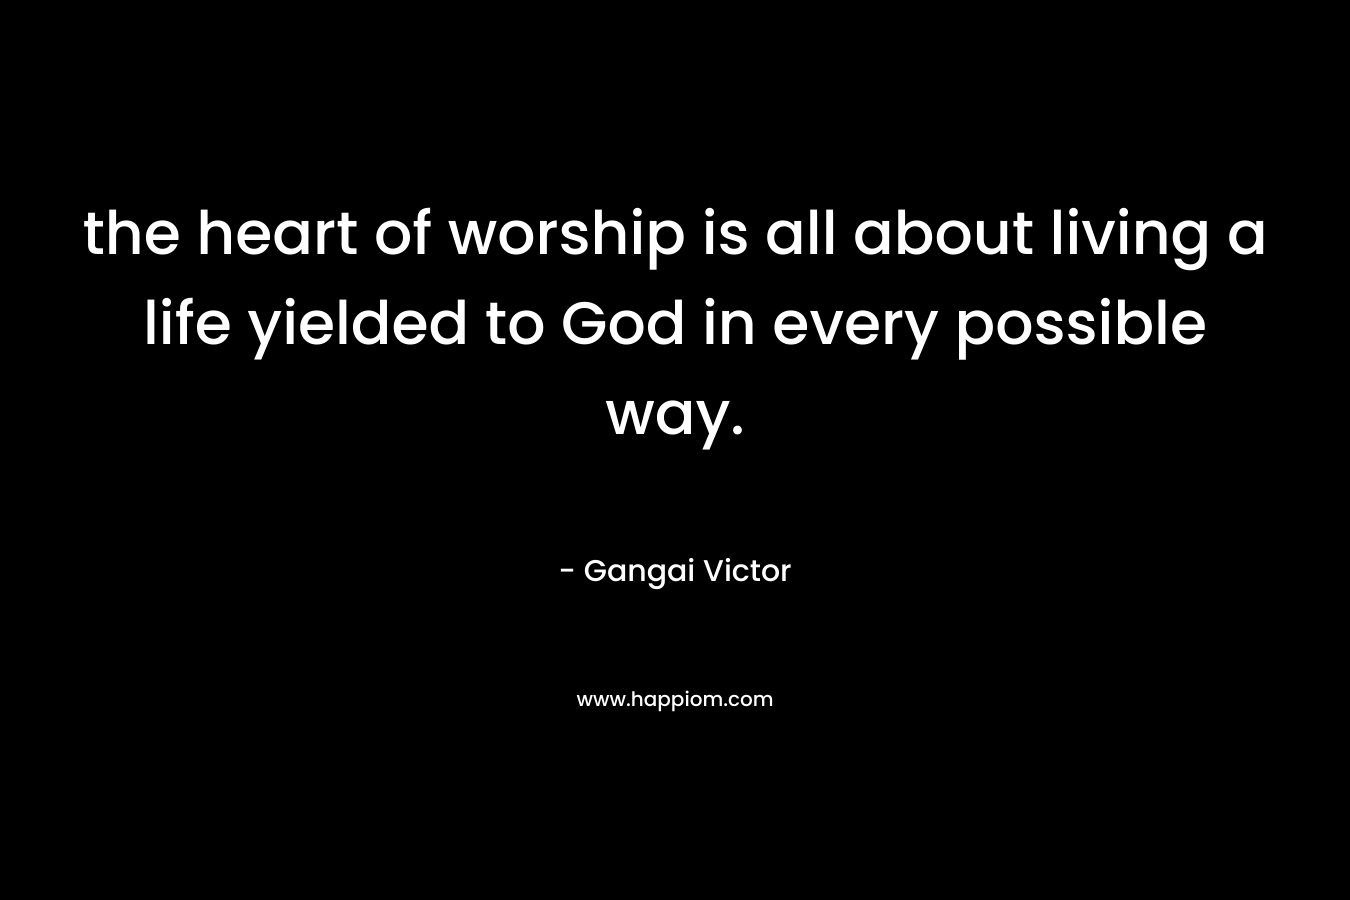 the heart of worship is all about living a life yielded to God in every possible way. – Gangai Victor